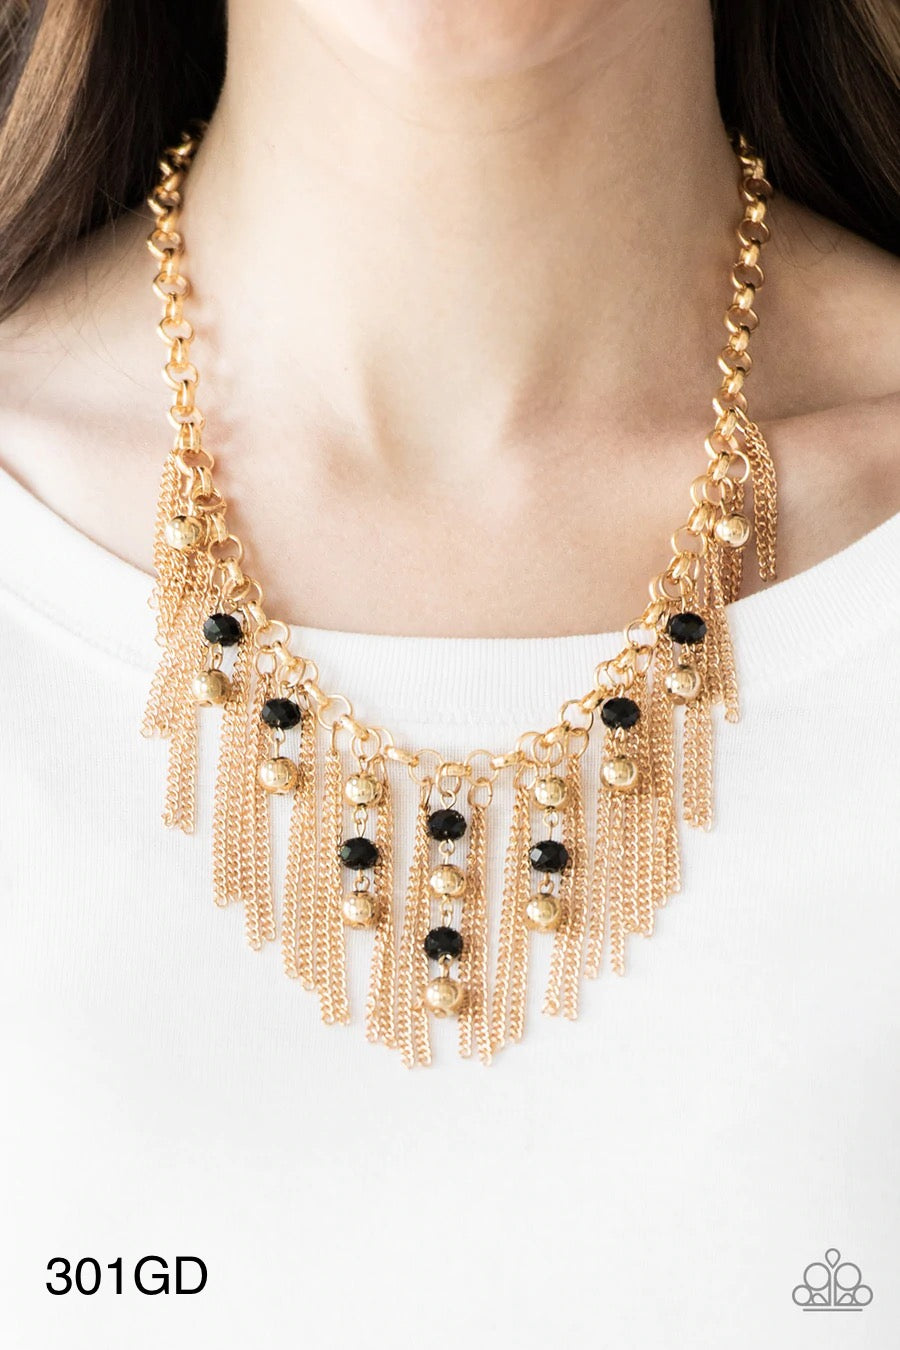 Paparazzi “Ever Rebellious” Gold Necklace Earring Set